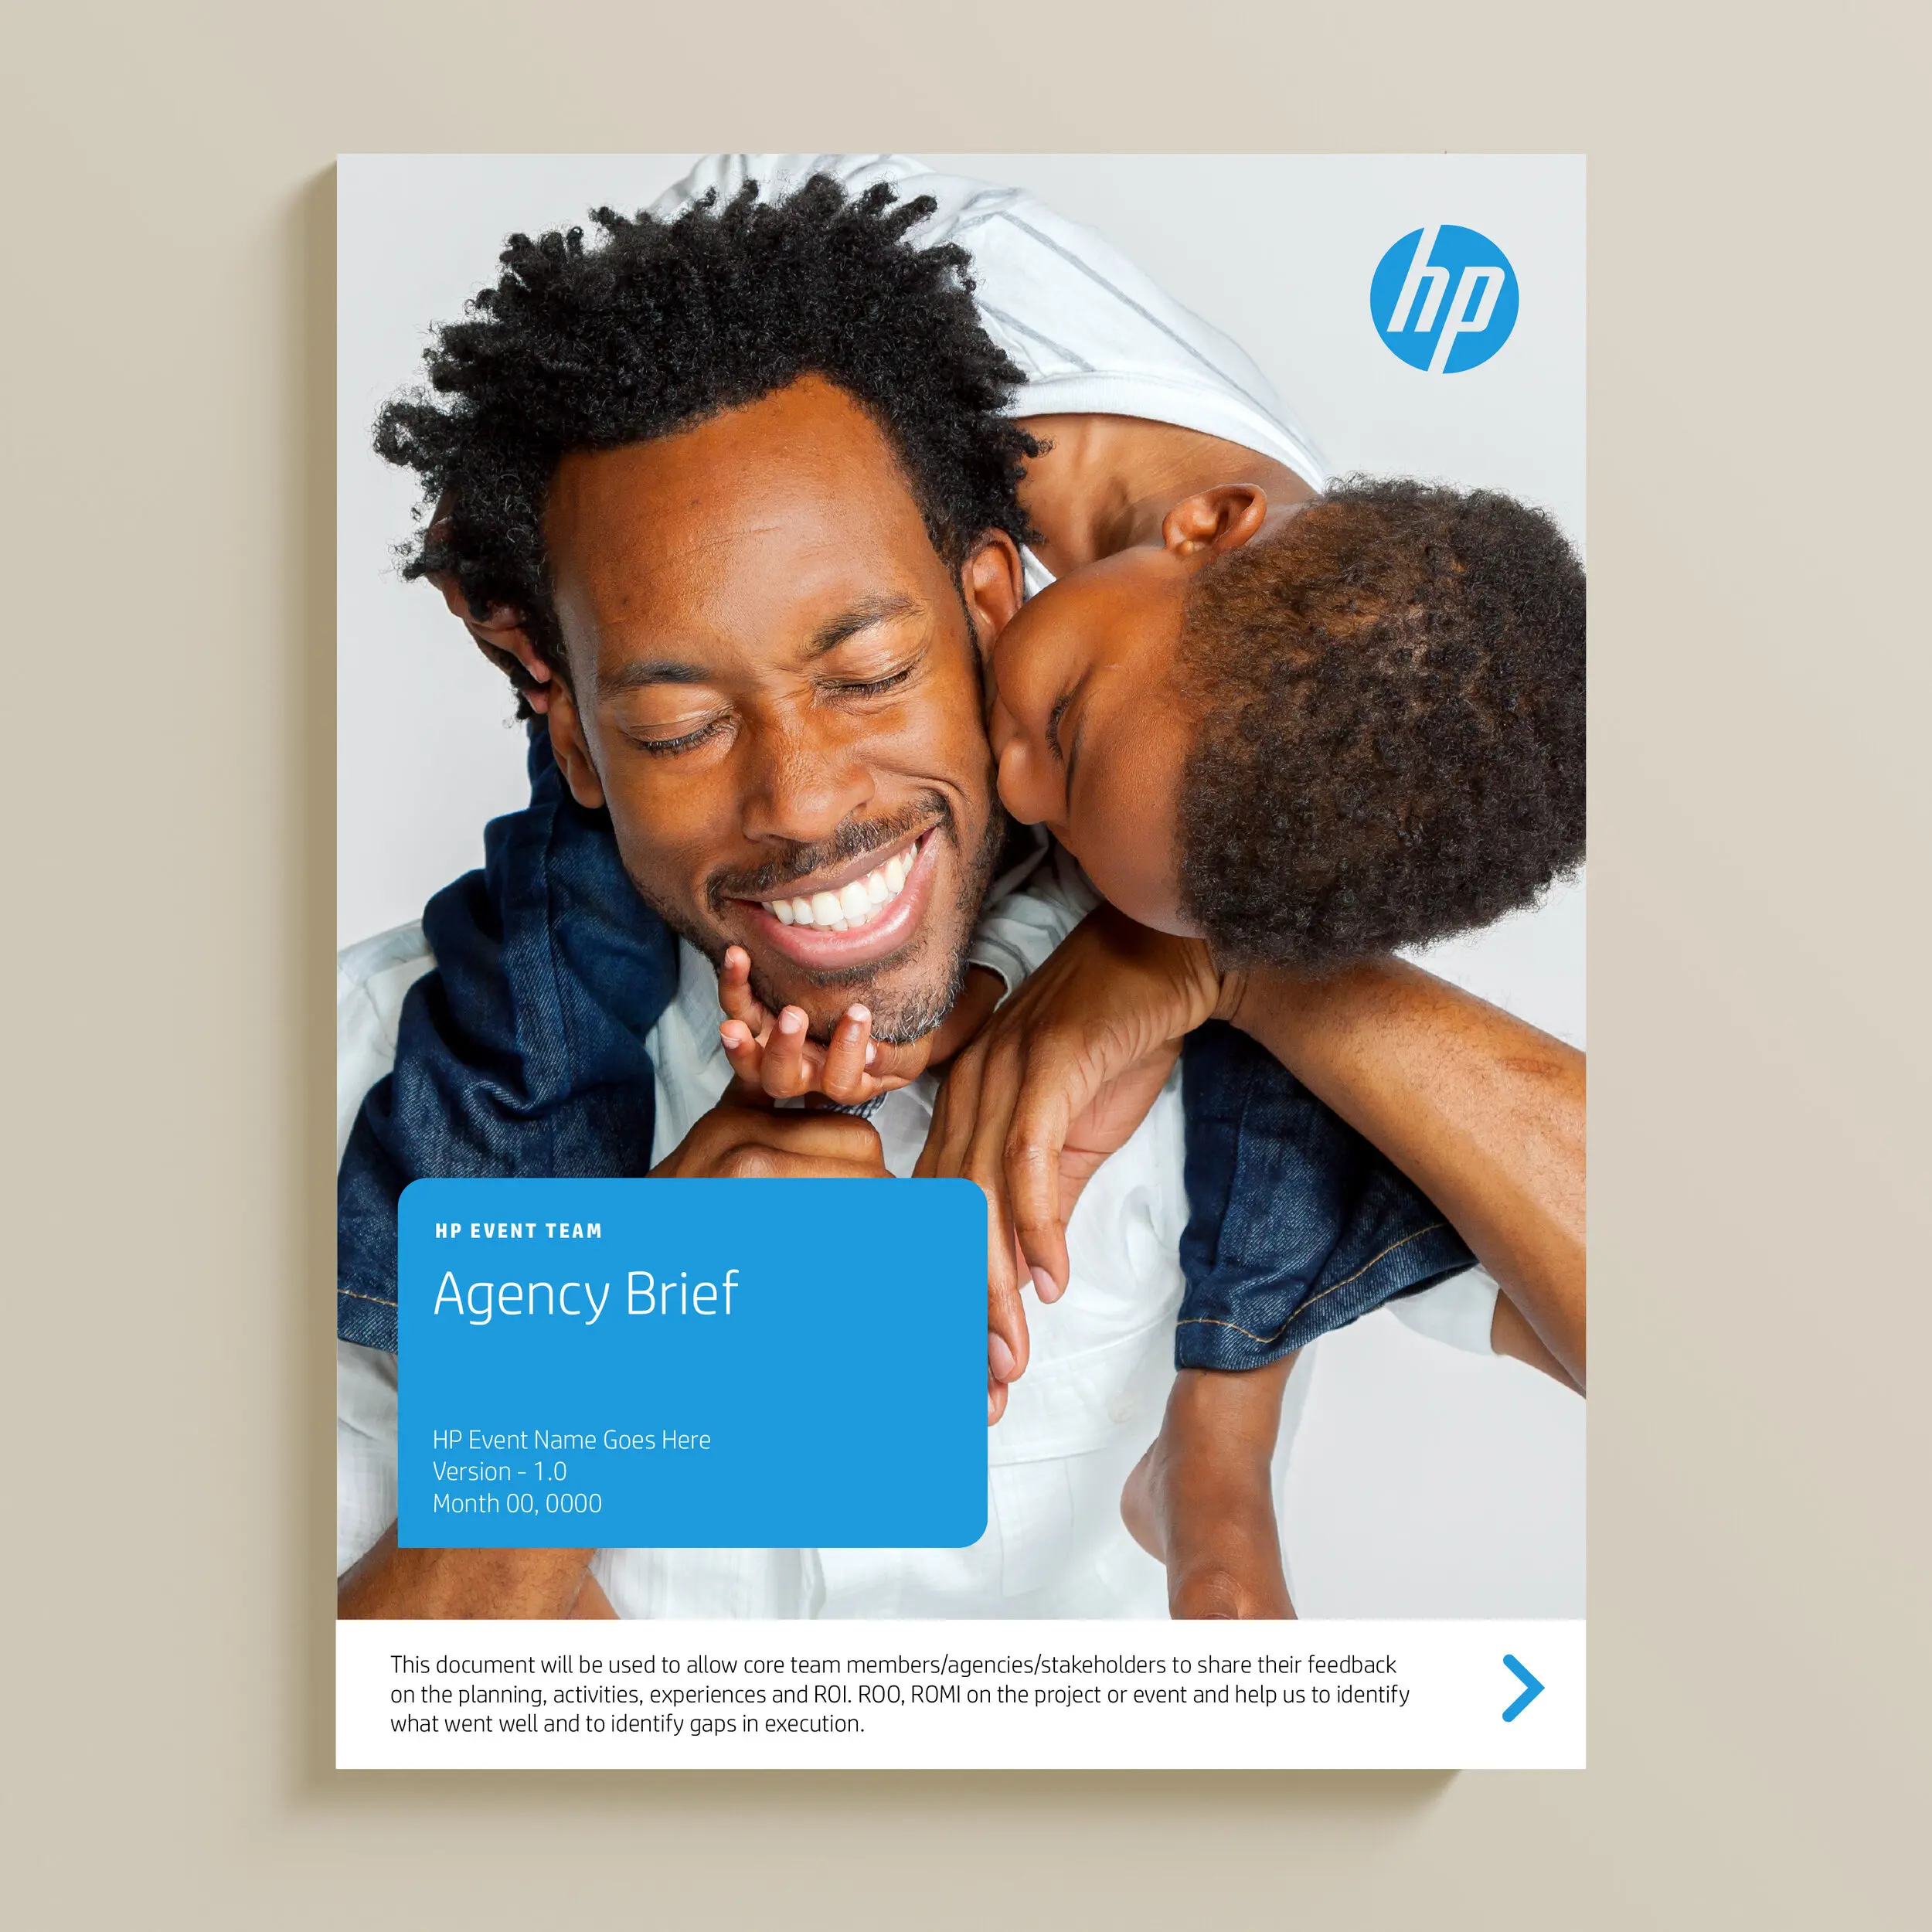 hewlett packard event planner - What does an event assistant do